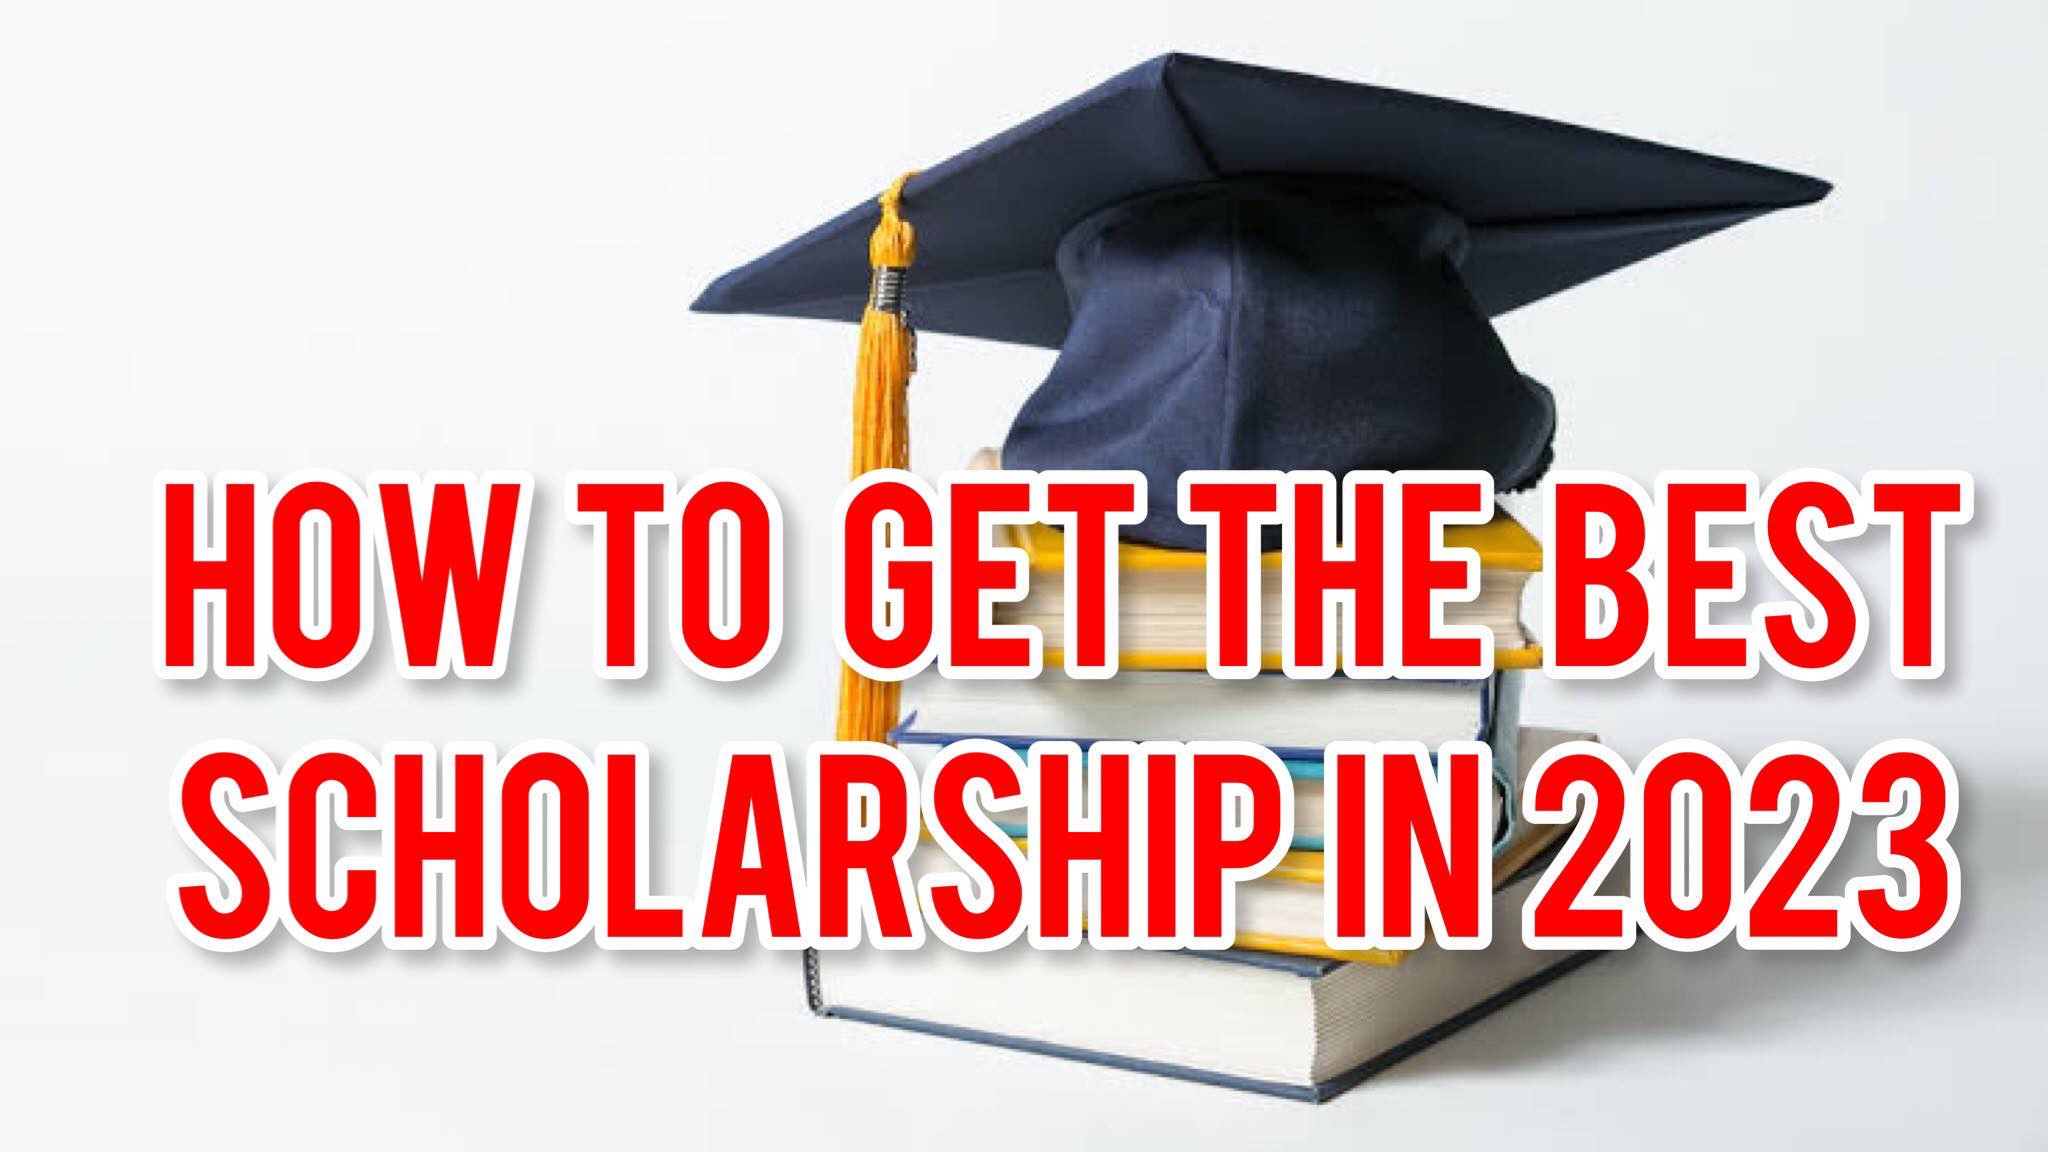 How to get the best scholarship